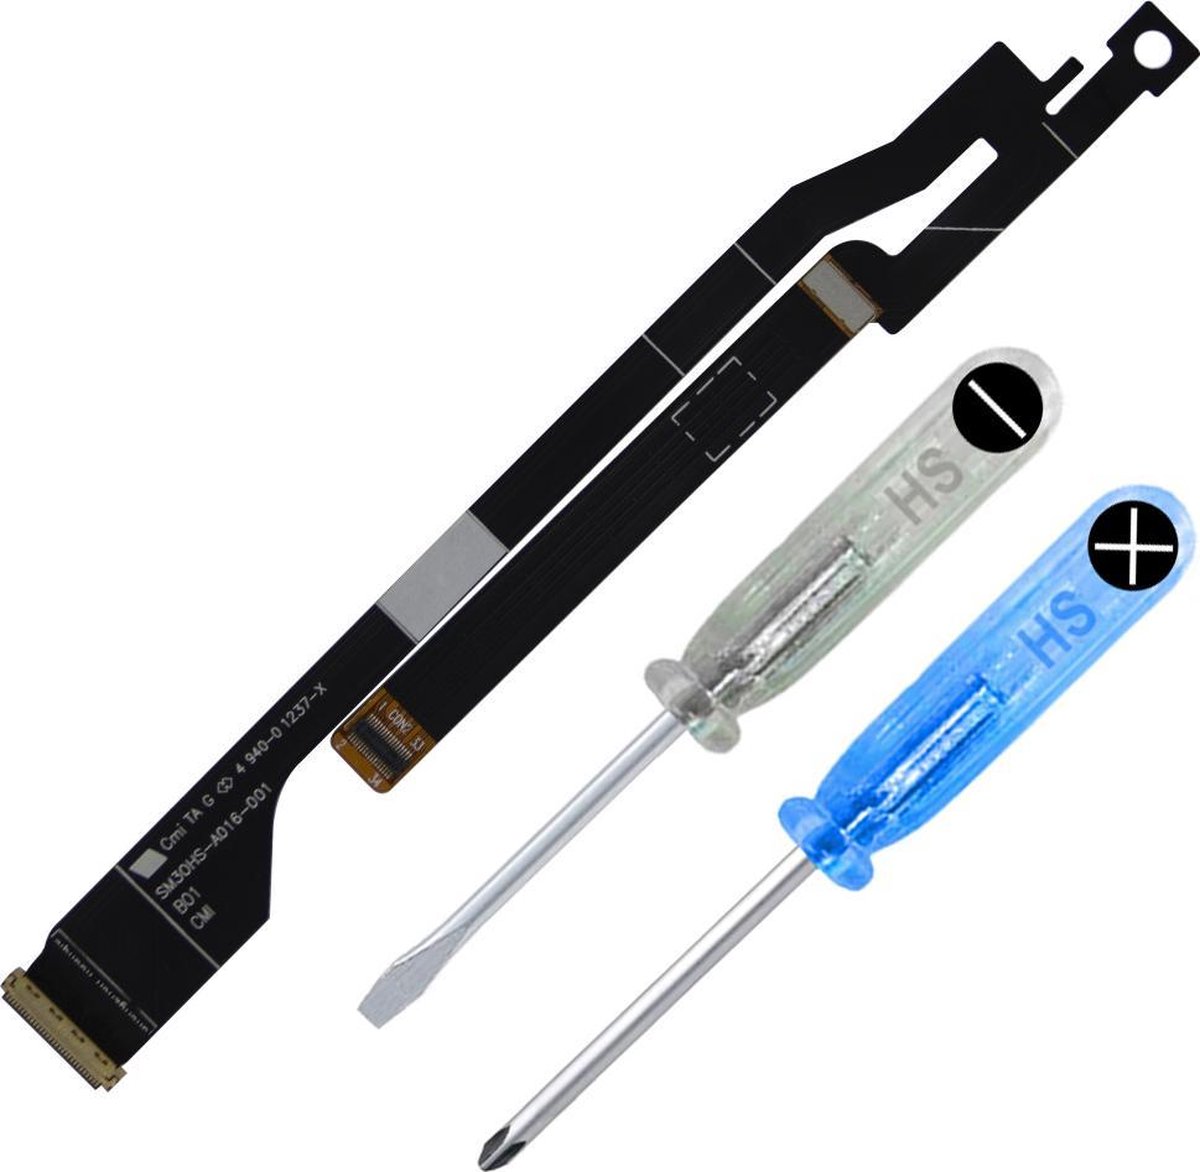 MMOBIEL LCD Screen Cable Wire Vervanging voor Acer Ultrabook Aspire S3-951 3